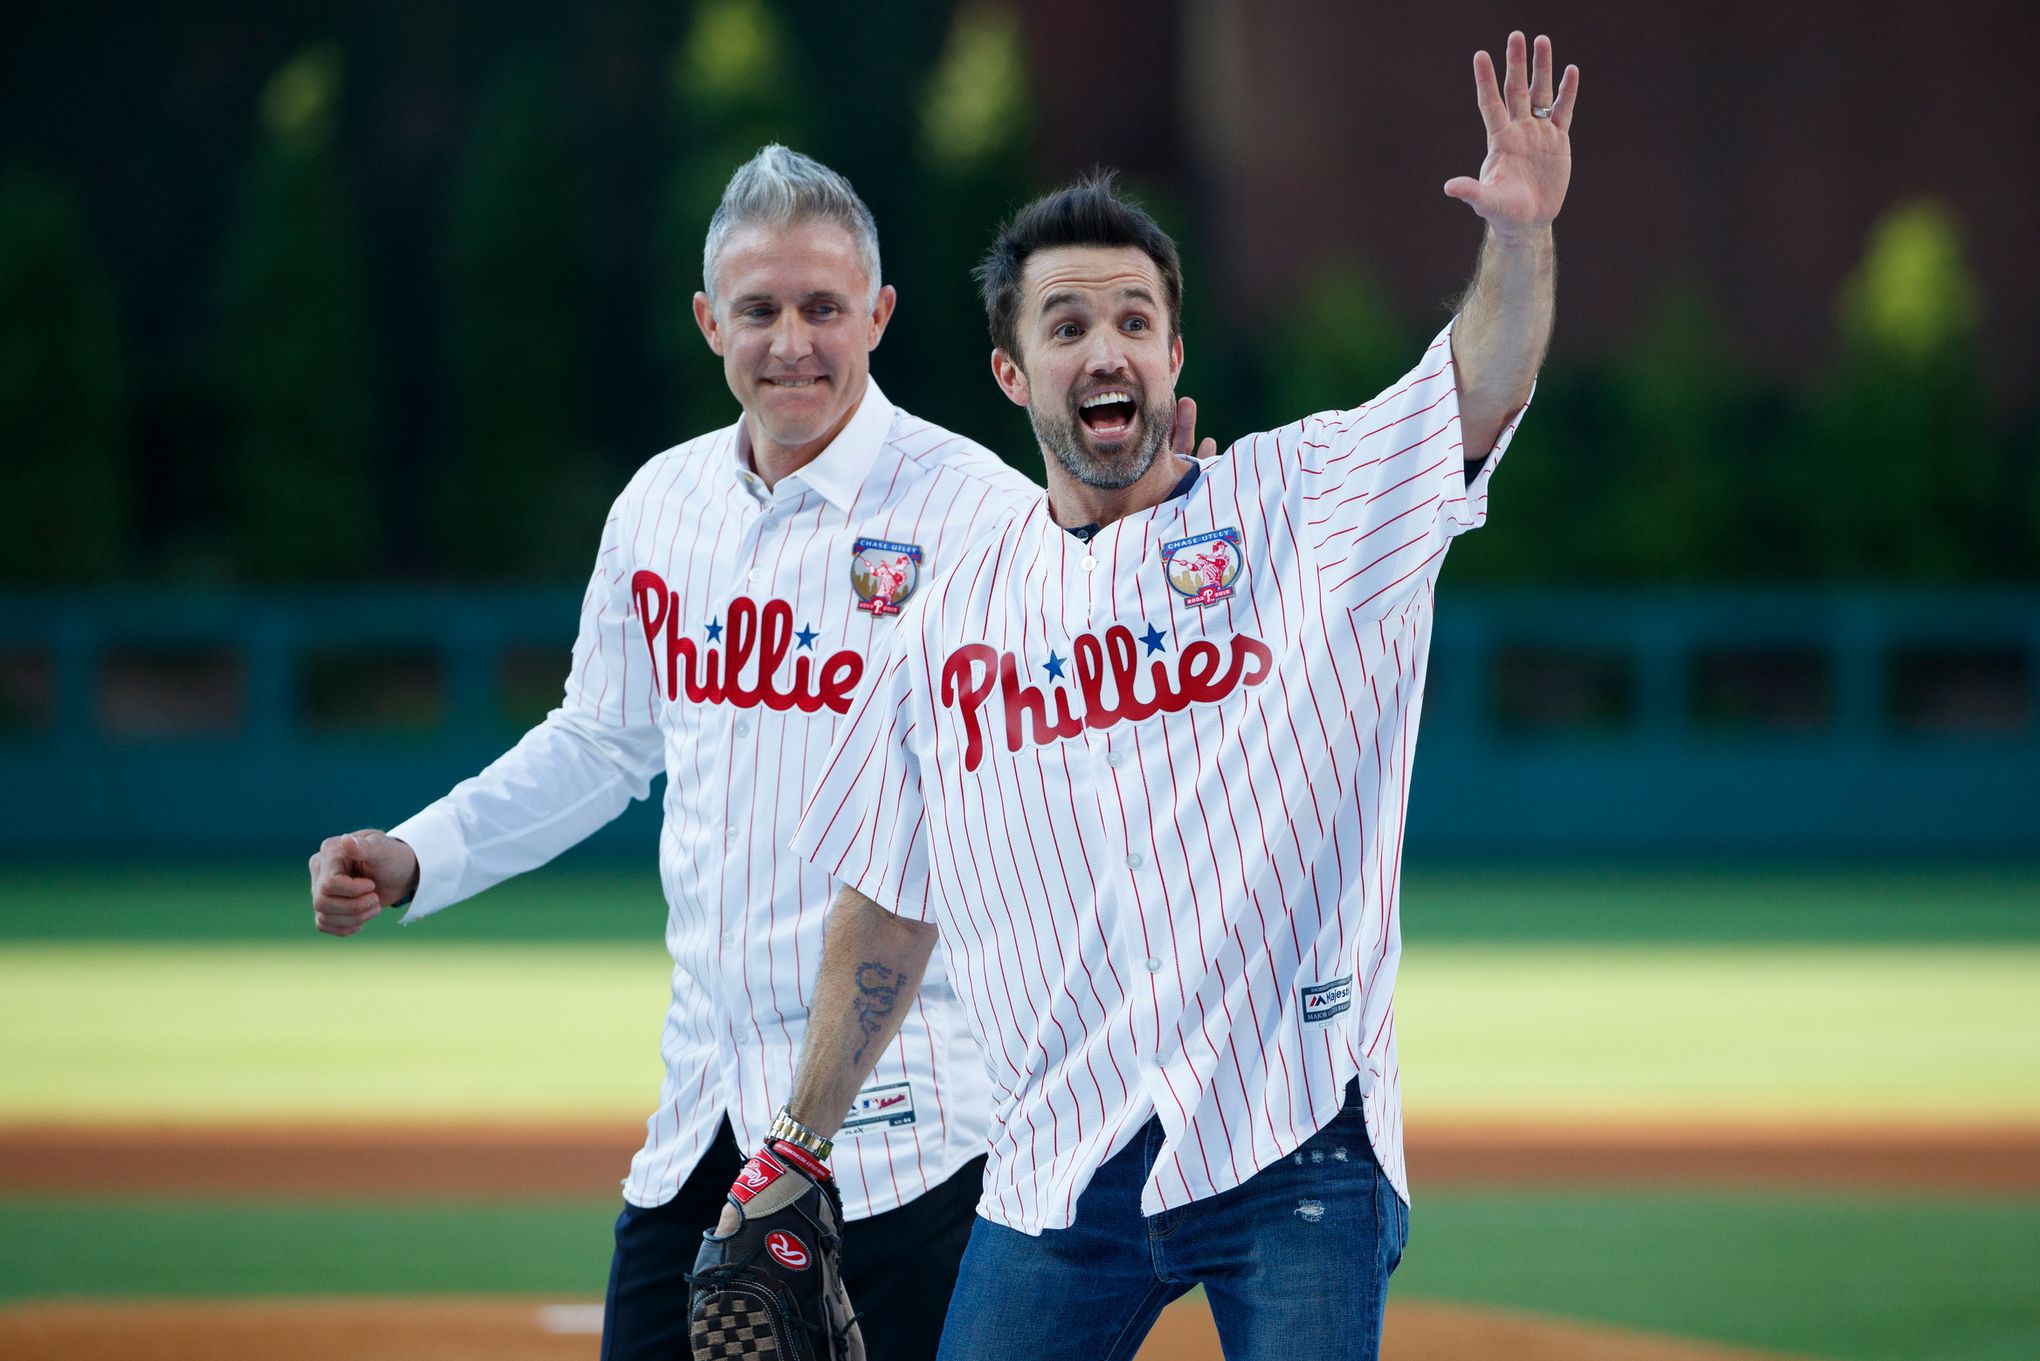 Utley honored, tosses pitch to Always Sunny's Rob McElhenney